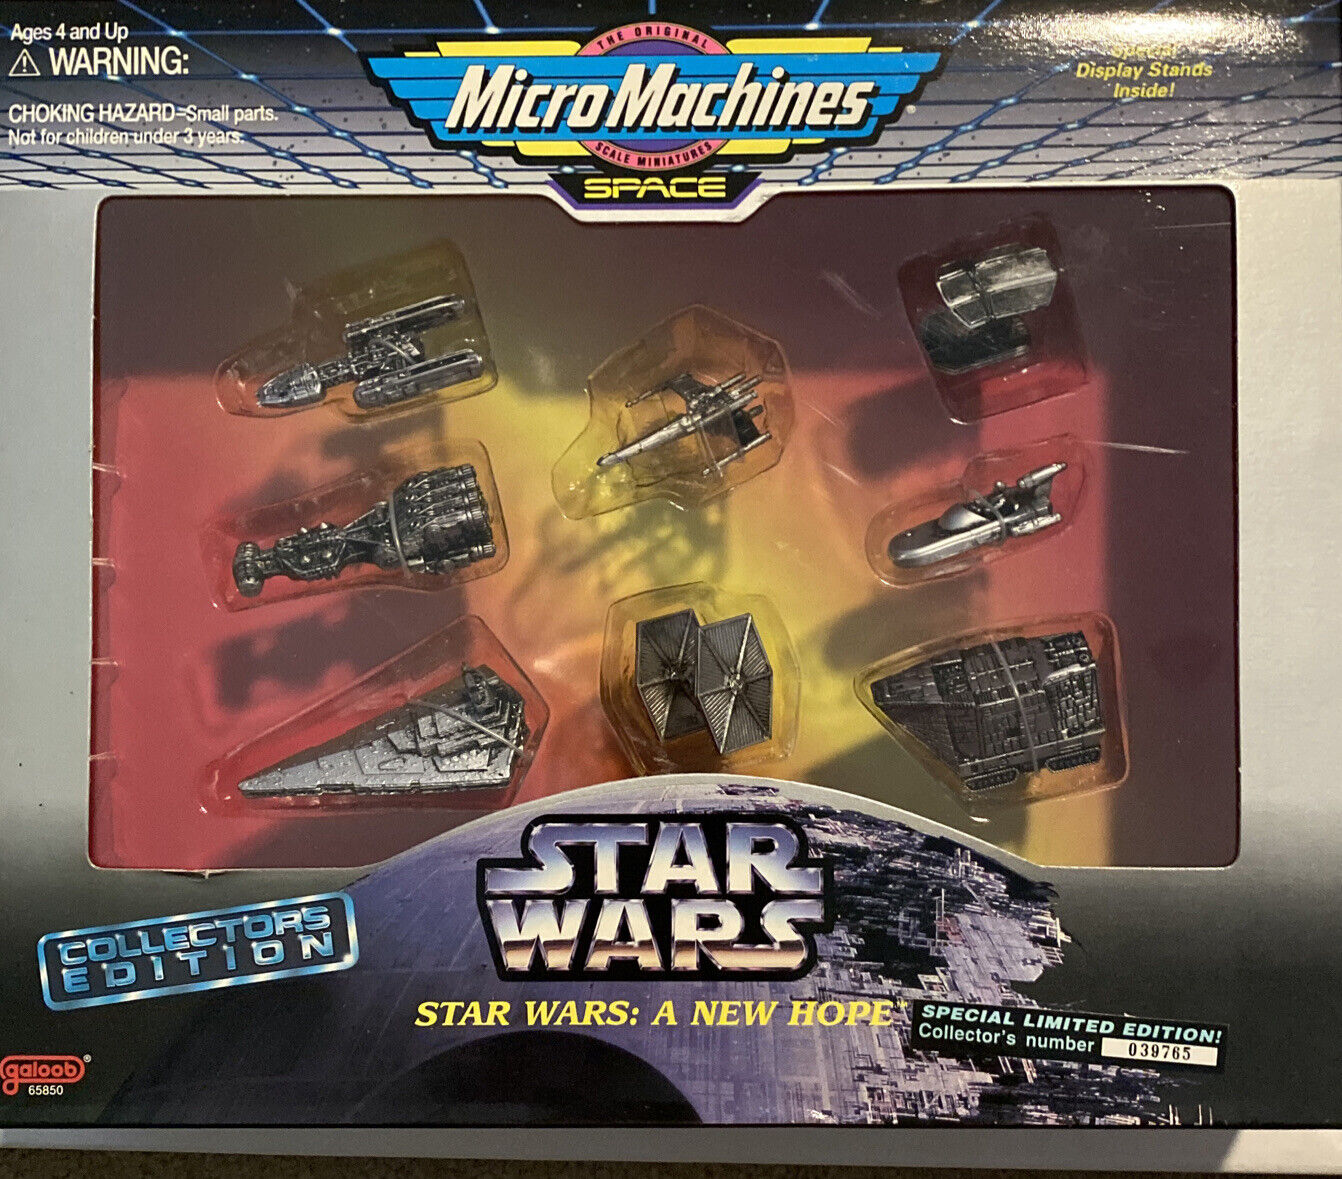 Micro Machines Star Wars A New Hope Collectors Edition.